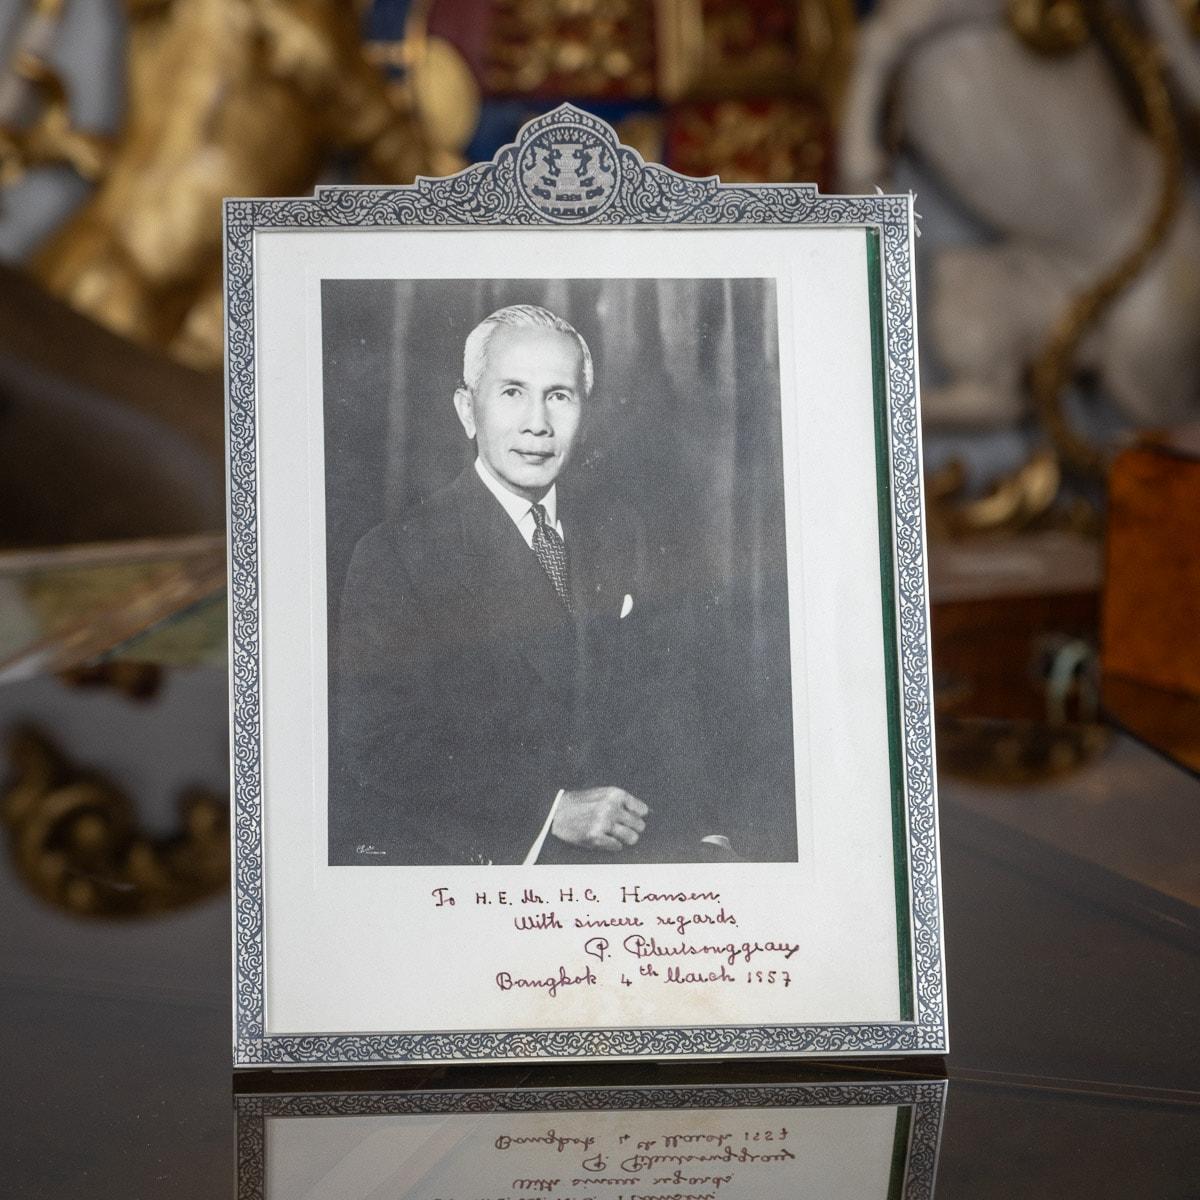 Stunning mid-20th Century Thai very large solid silver & niello presentation photograph frame. Upright rectangular form with shaped top, inside bearing the photograph of Field Marshal Plaek Phibunsongkhram, frame boarders decorated with dense floral